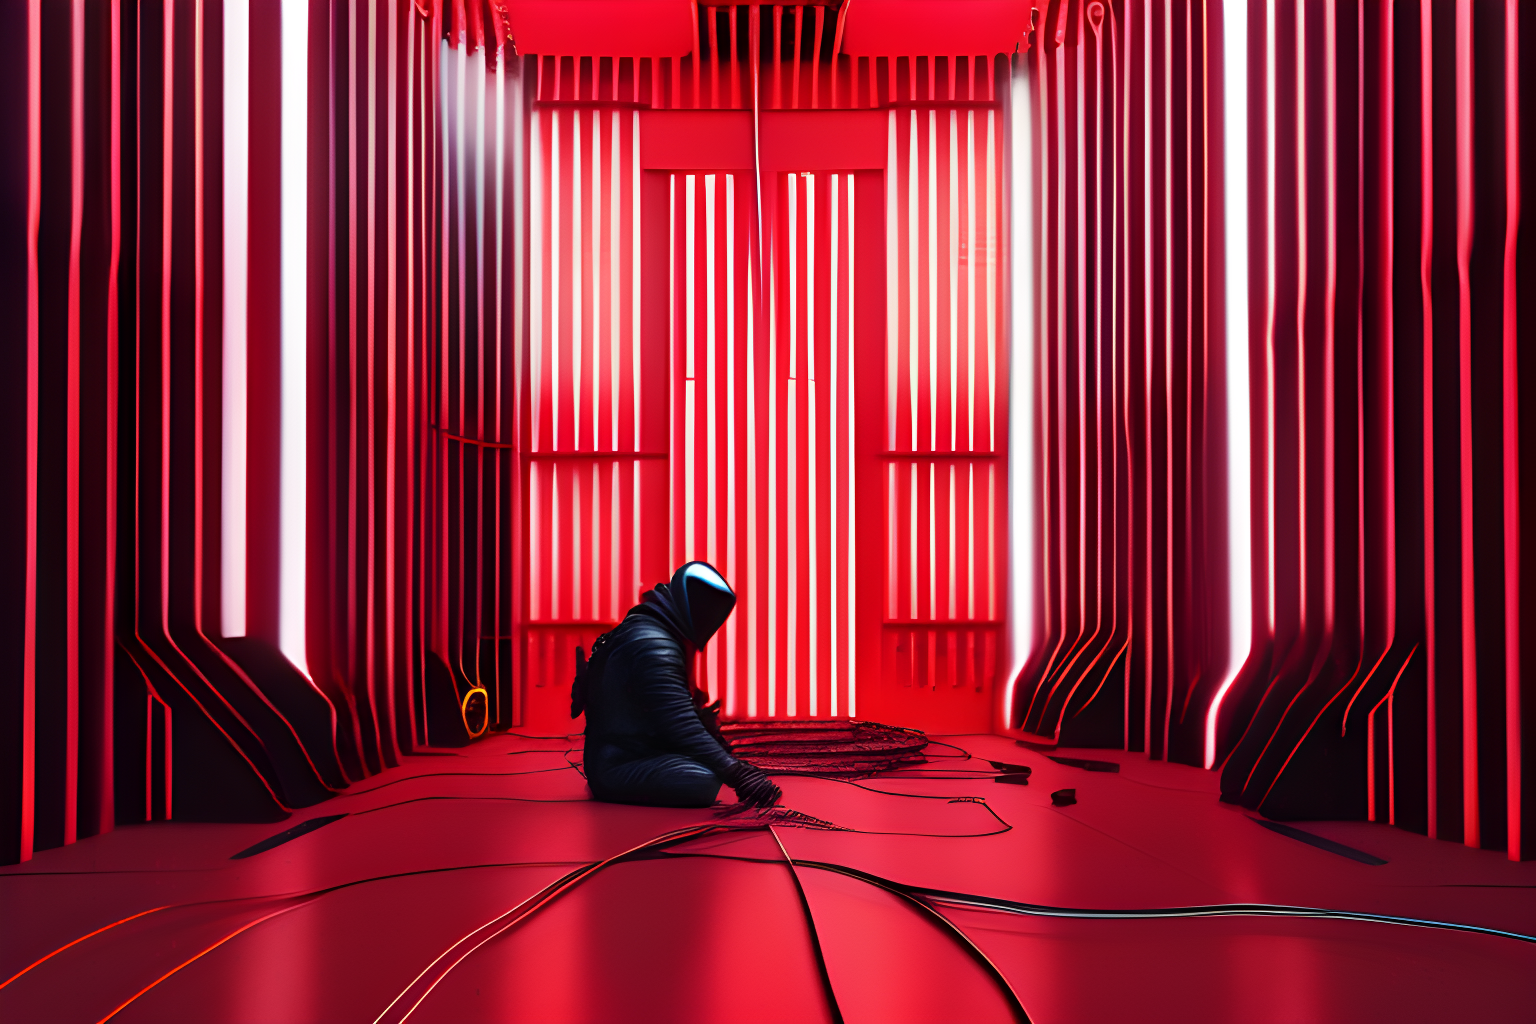 synth human releasing itself from cables in a dystopian red room